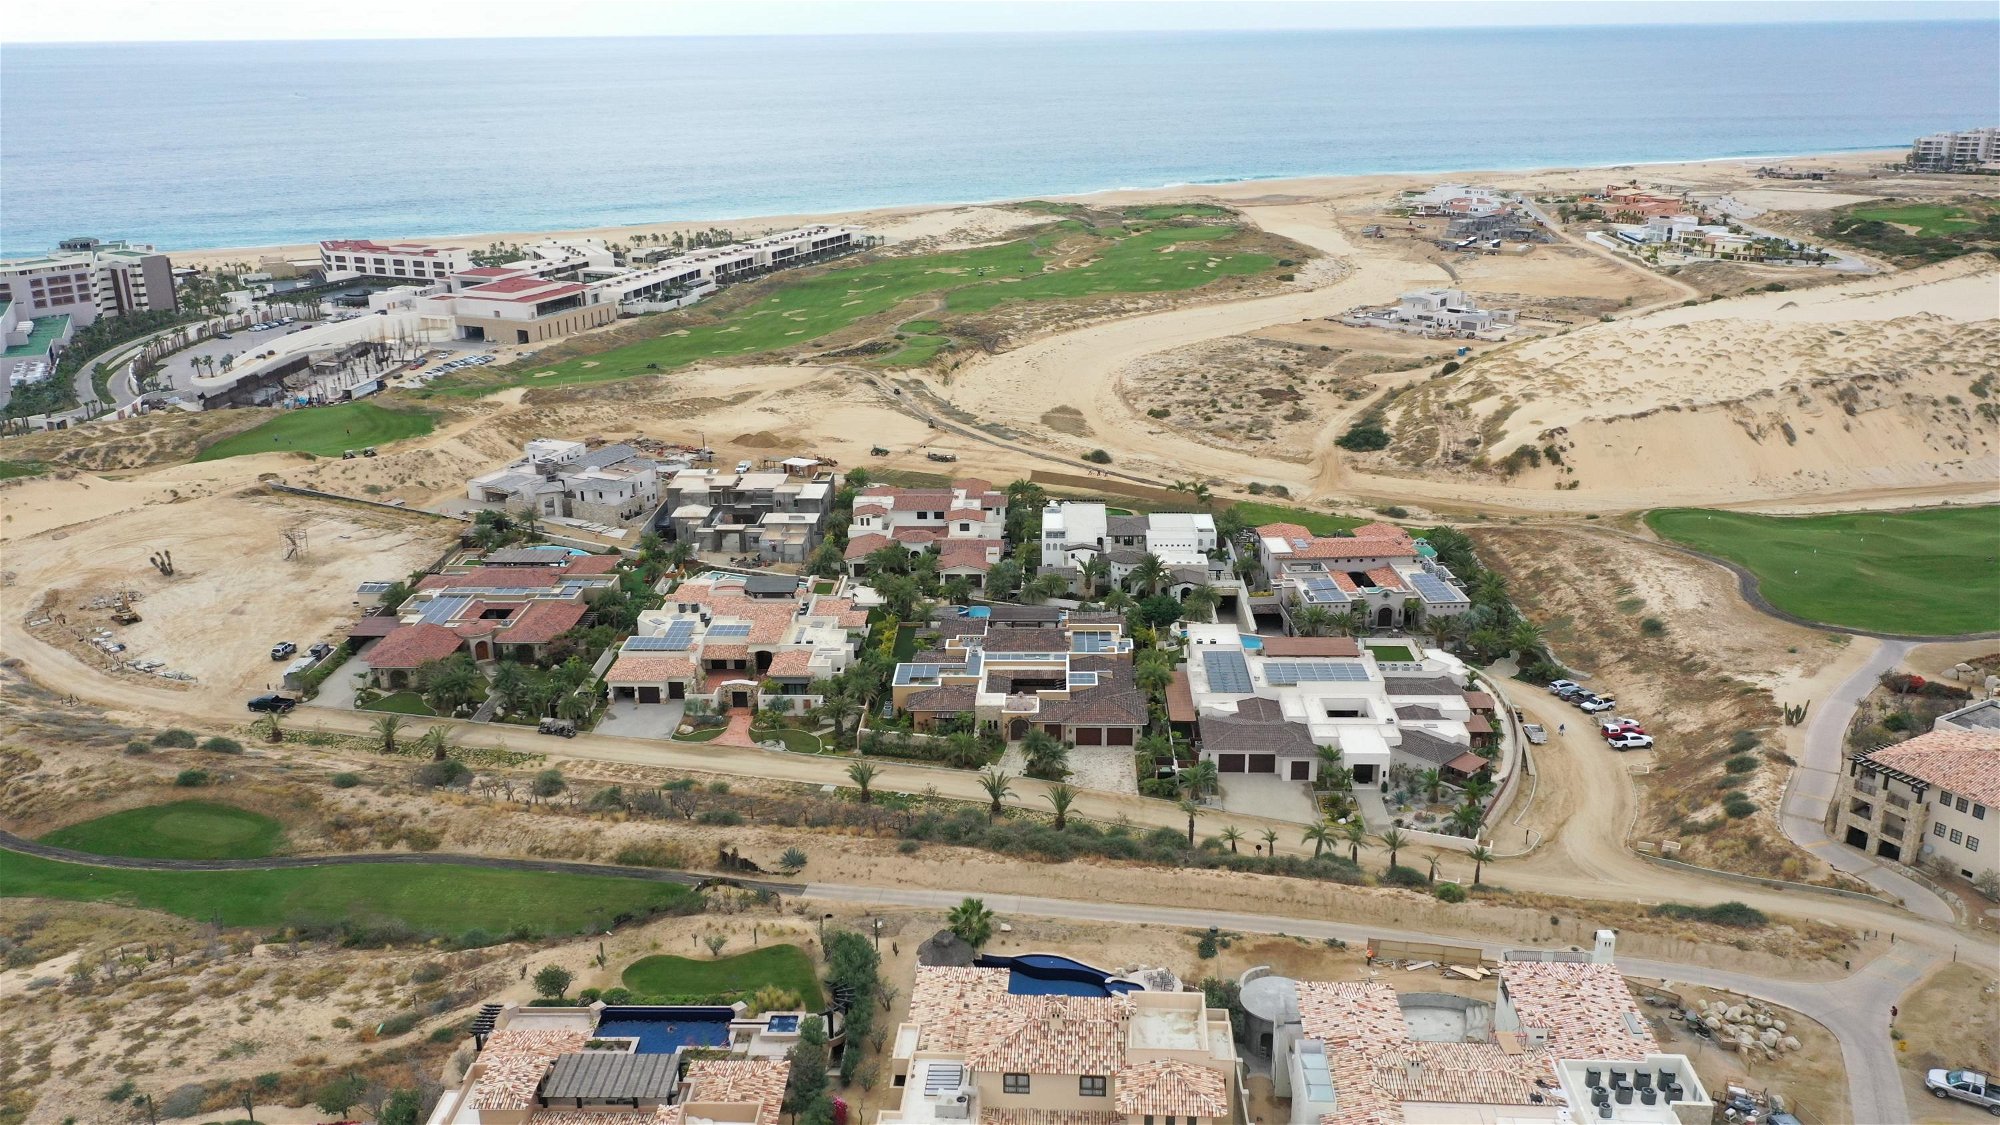 Land For Sale in Cabo San Lucas 3885163071